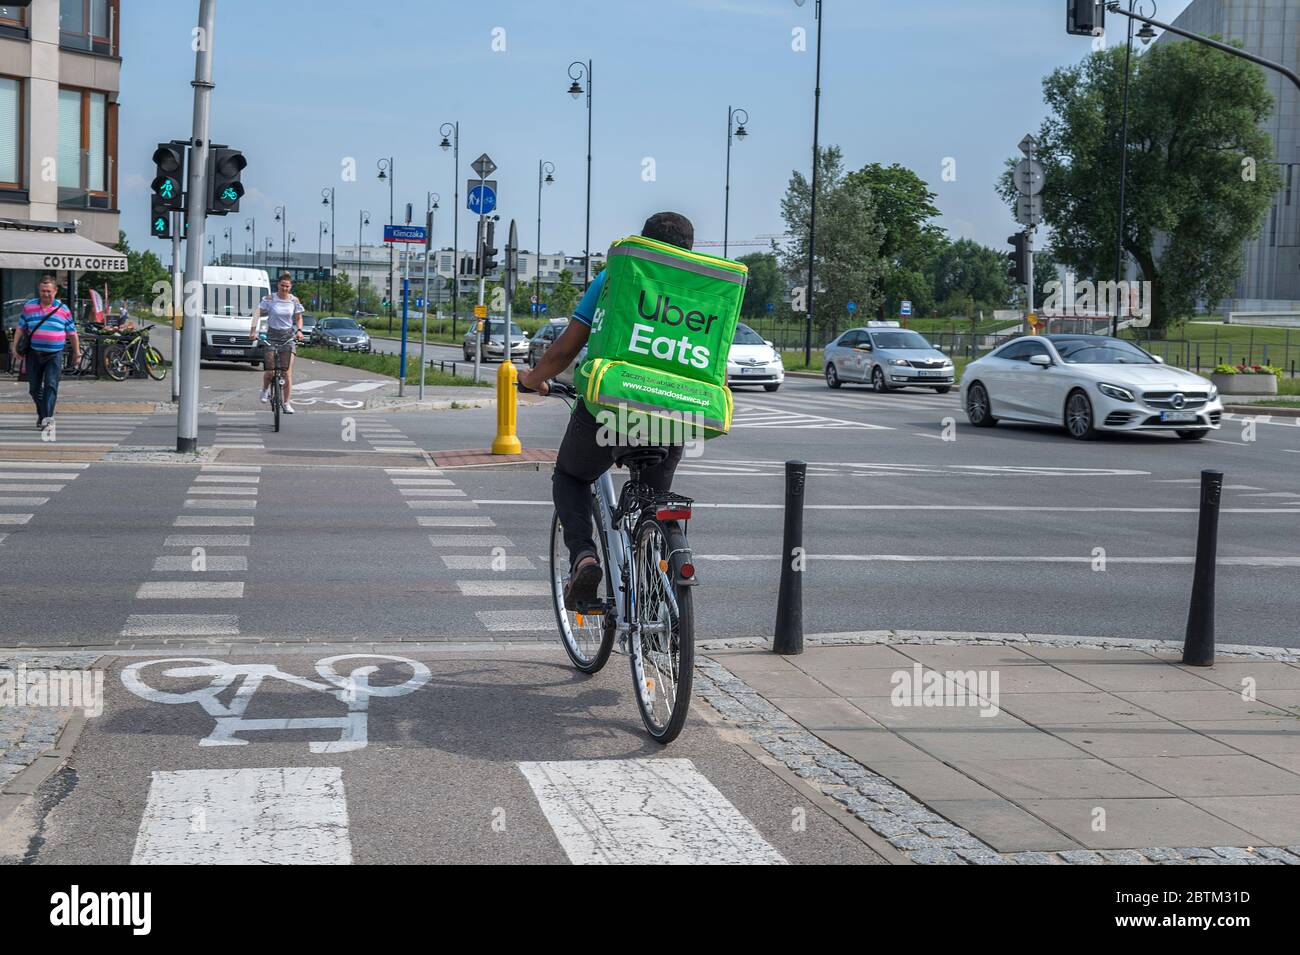 WARSAW, POLNAD - June 15, 2019: UberEATS cycle delivery courier. Uber Eats delivery in progress on Warsaw street - Poland. UberEATS is online food ord Stock Photo